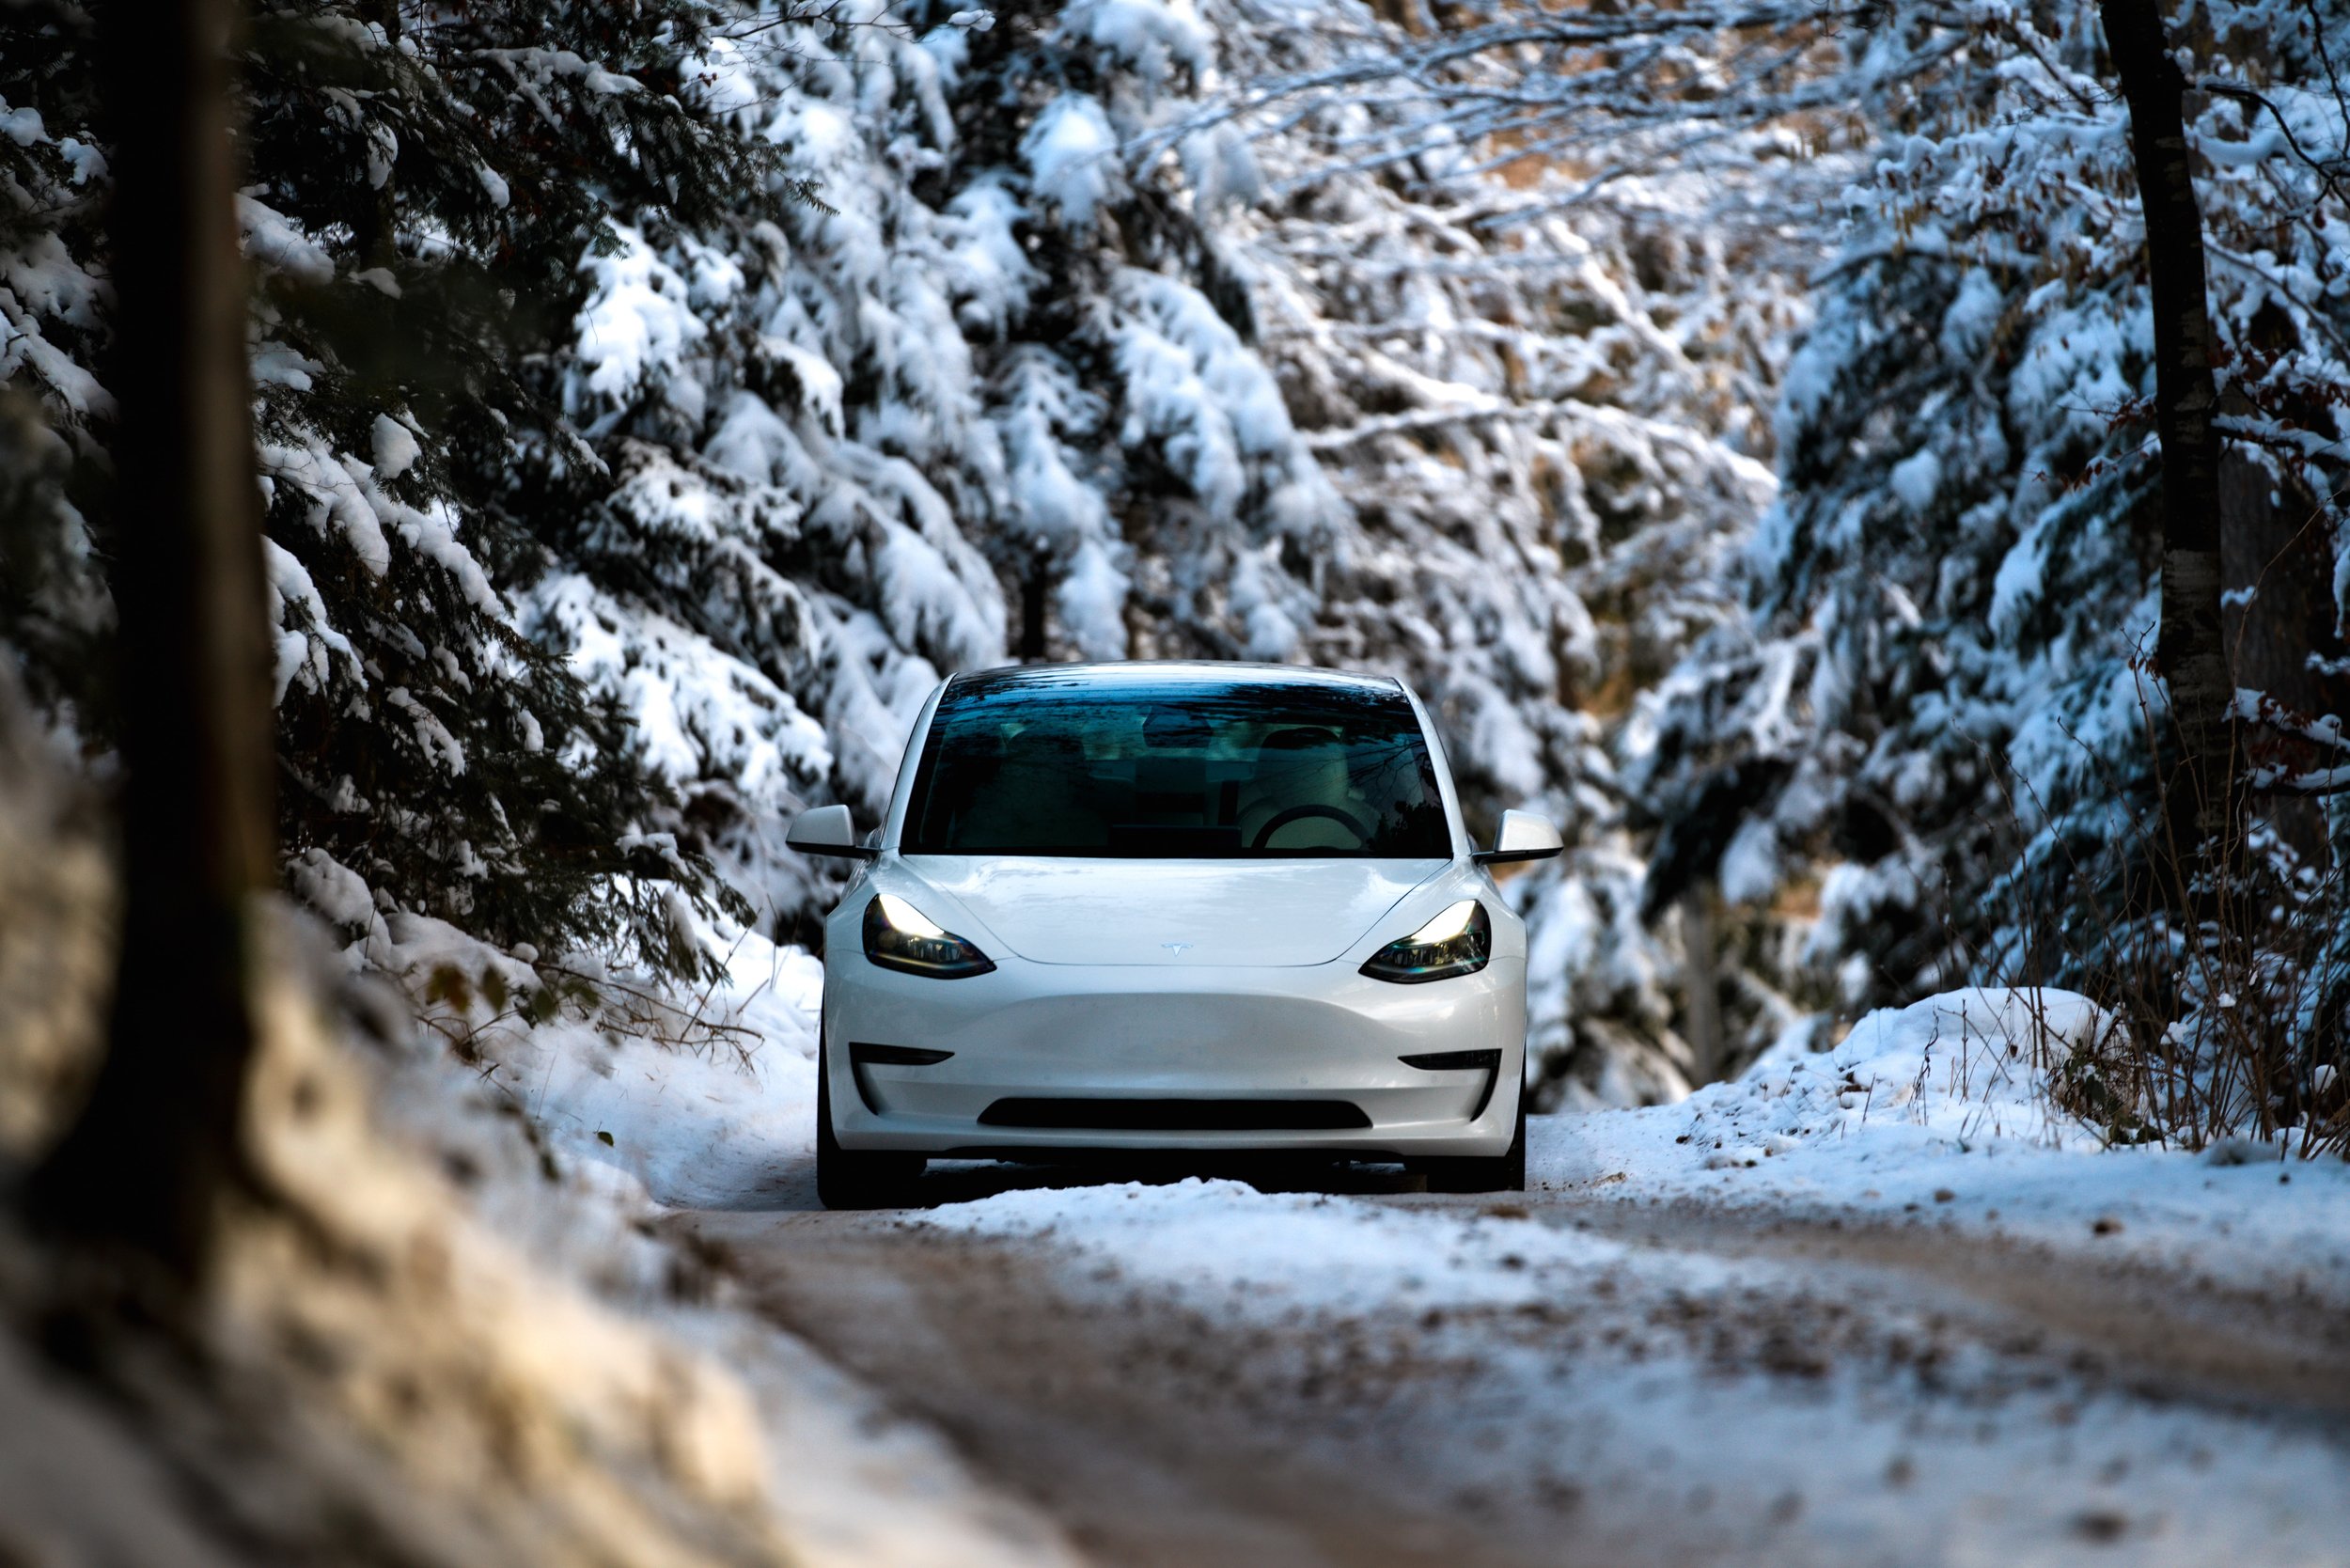 Electric Cars vs Winter: How does the cold affect my range? — The